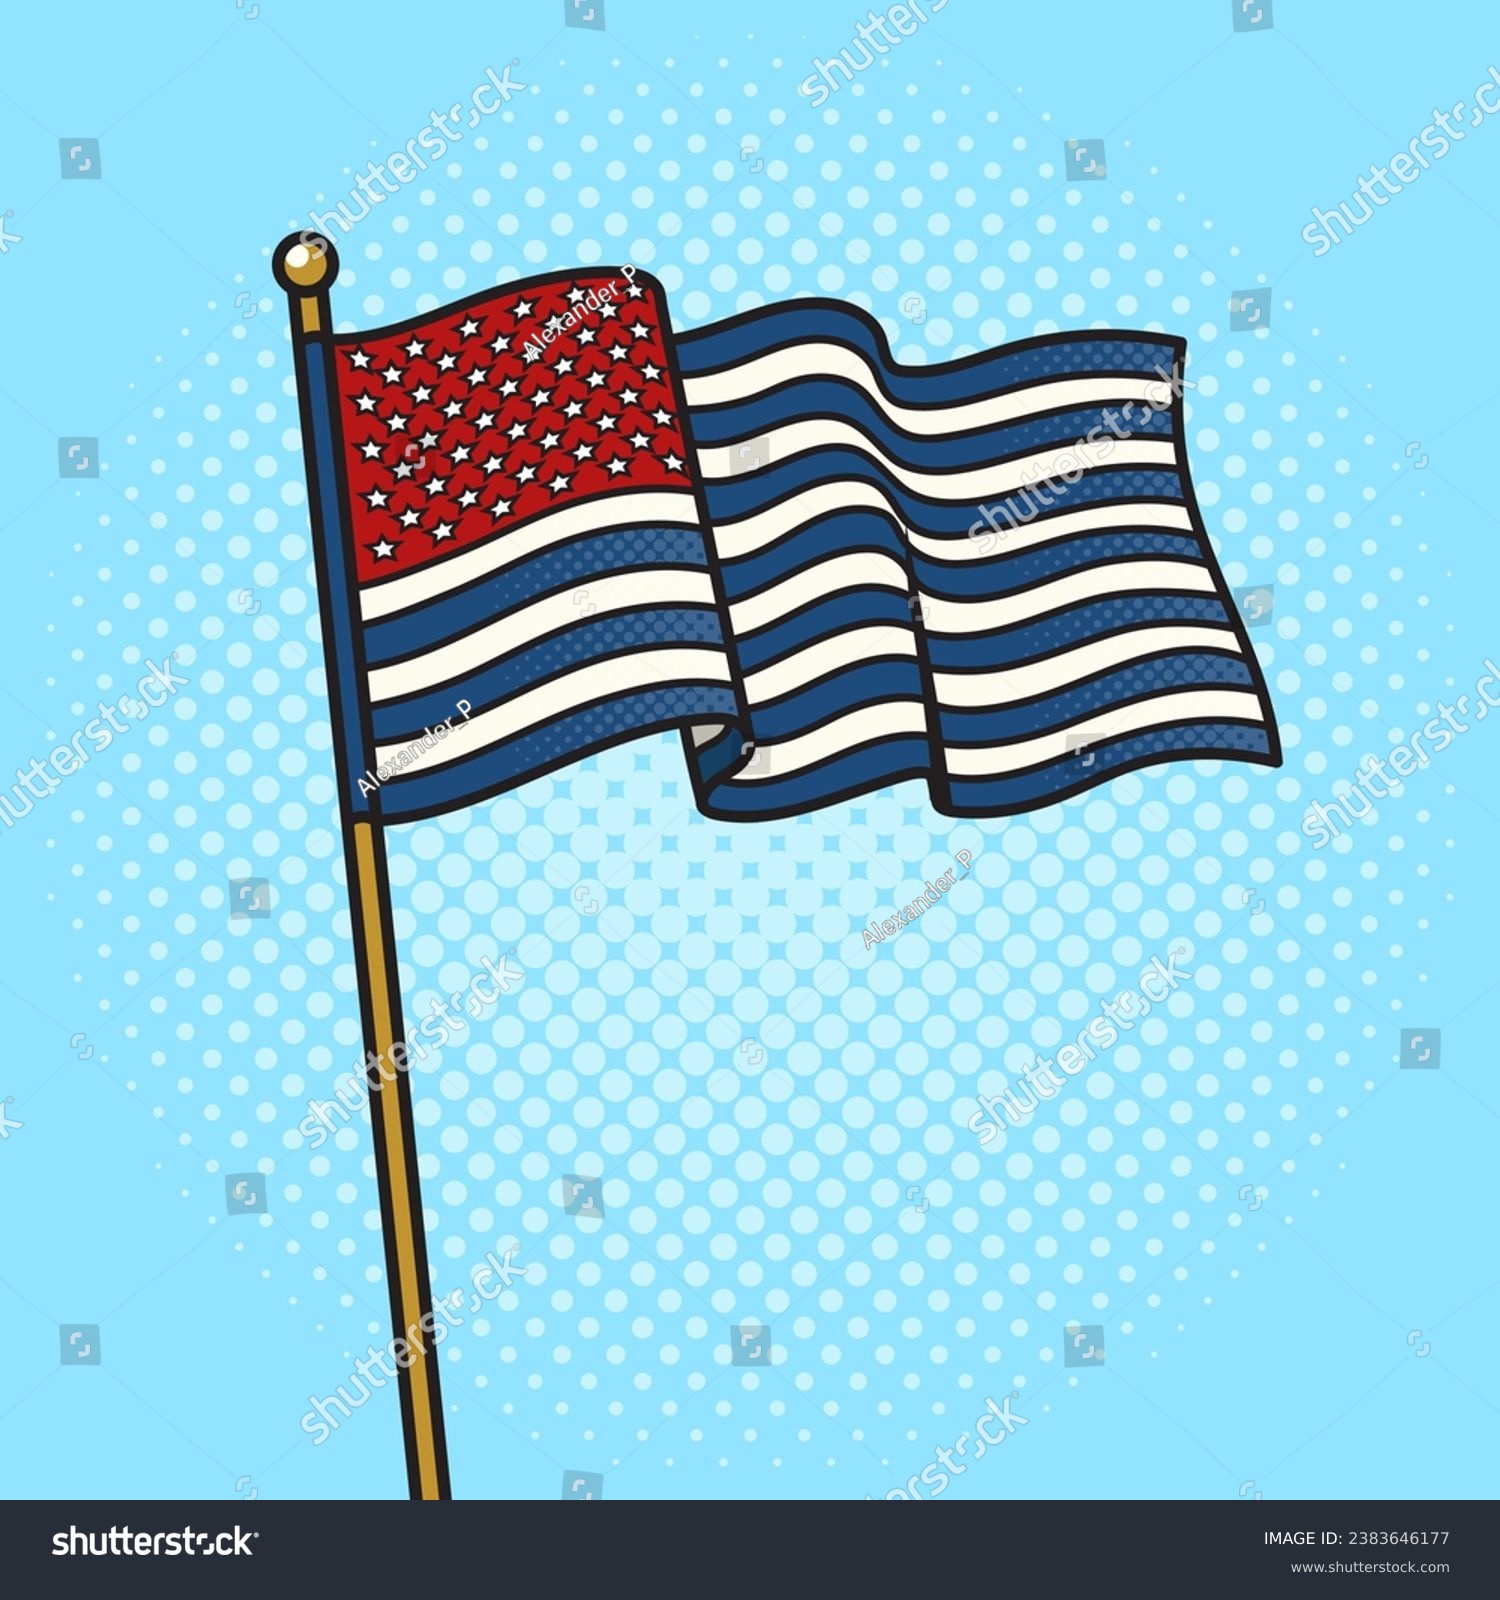 SVG of Flag of the USA inverted colors of the British flag pop art retro vector illustration. Comic book style imitation. svg